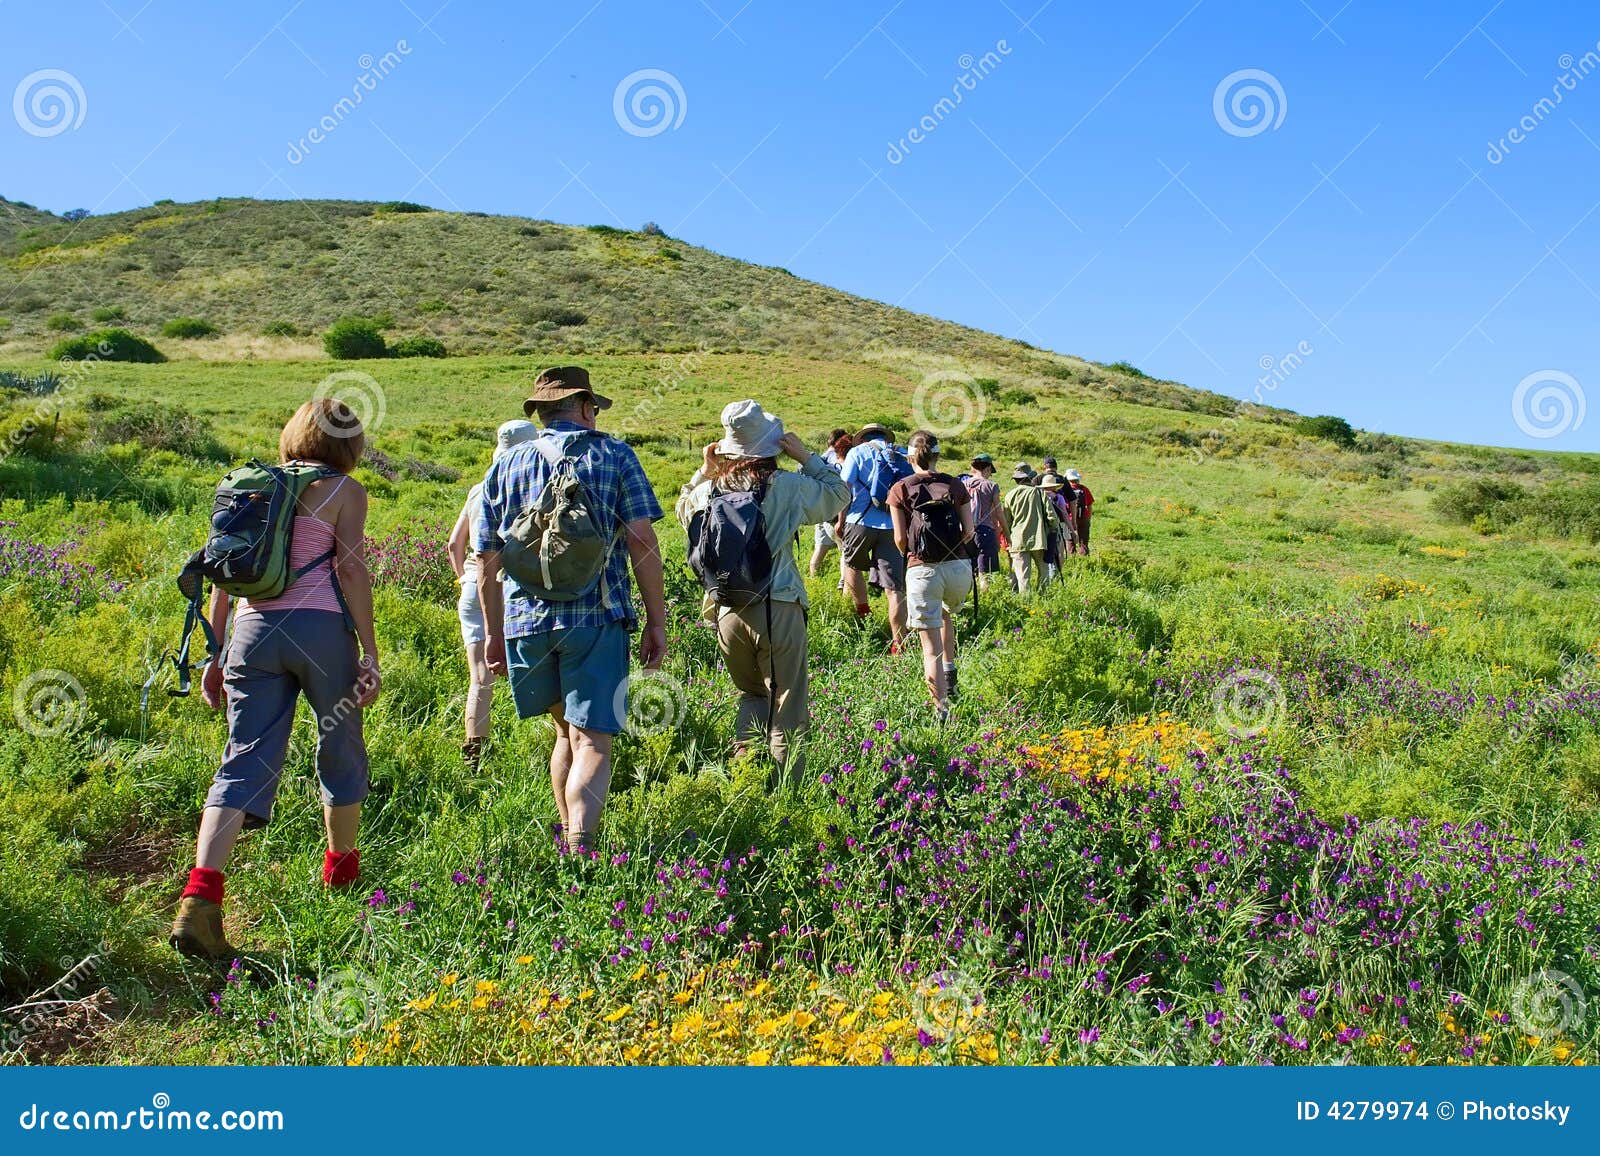 group of hikers walks mountain rural landscape